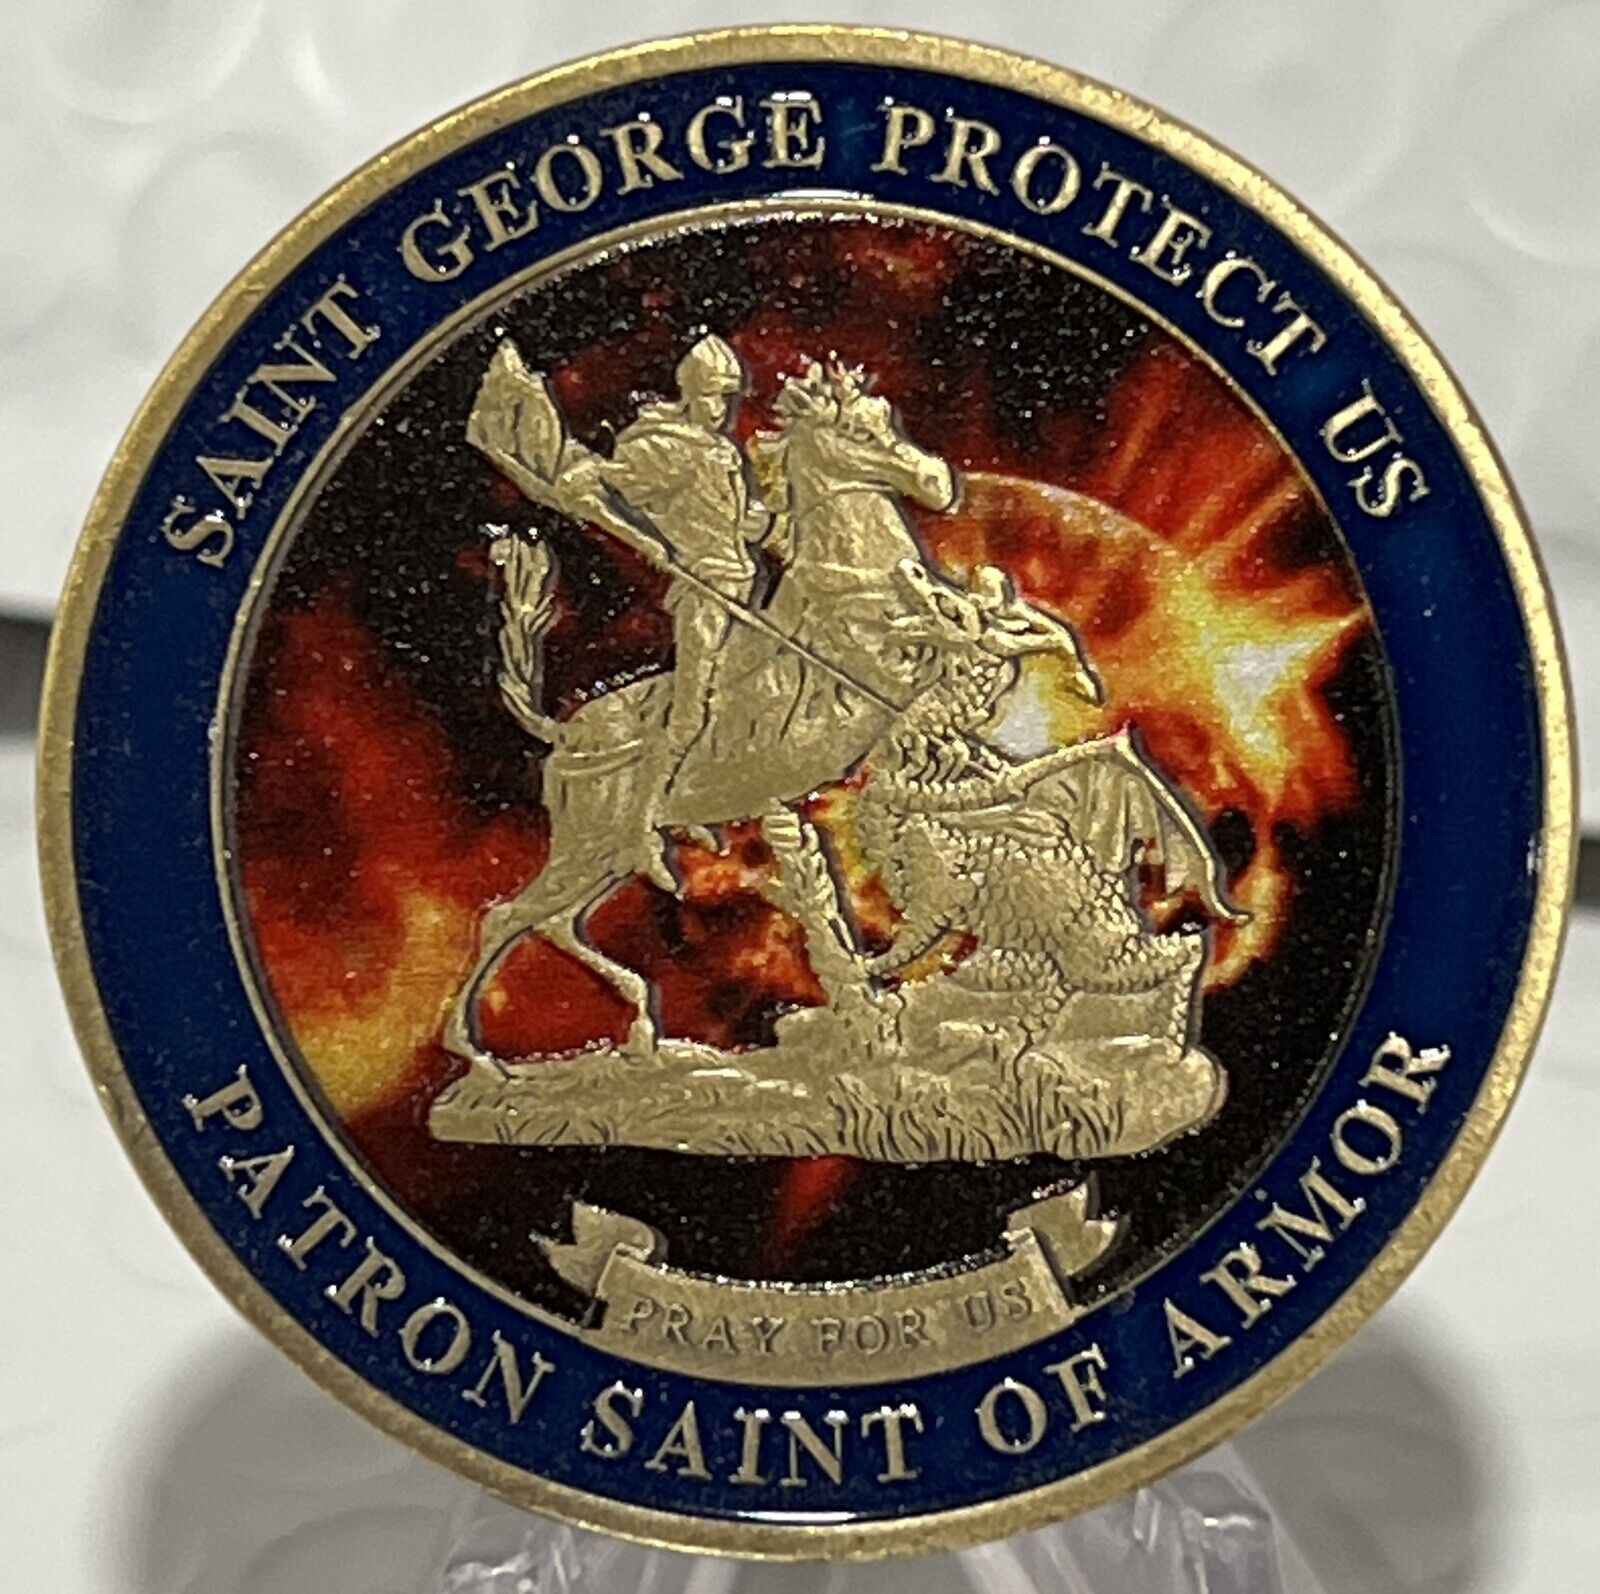 * Police SWAT Challenge Coin St George Protector Of SWAT Officers Beautiful Coin